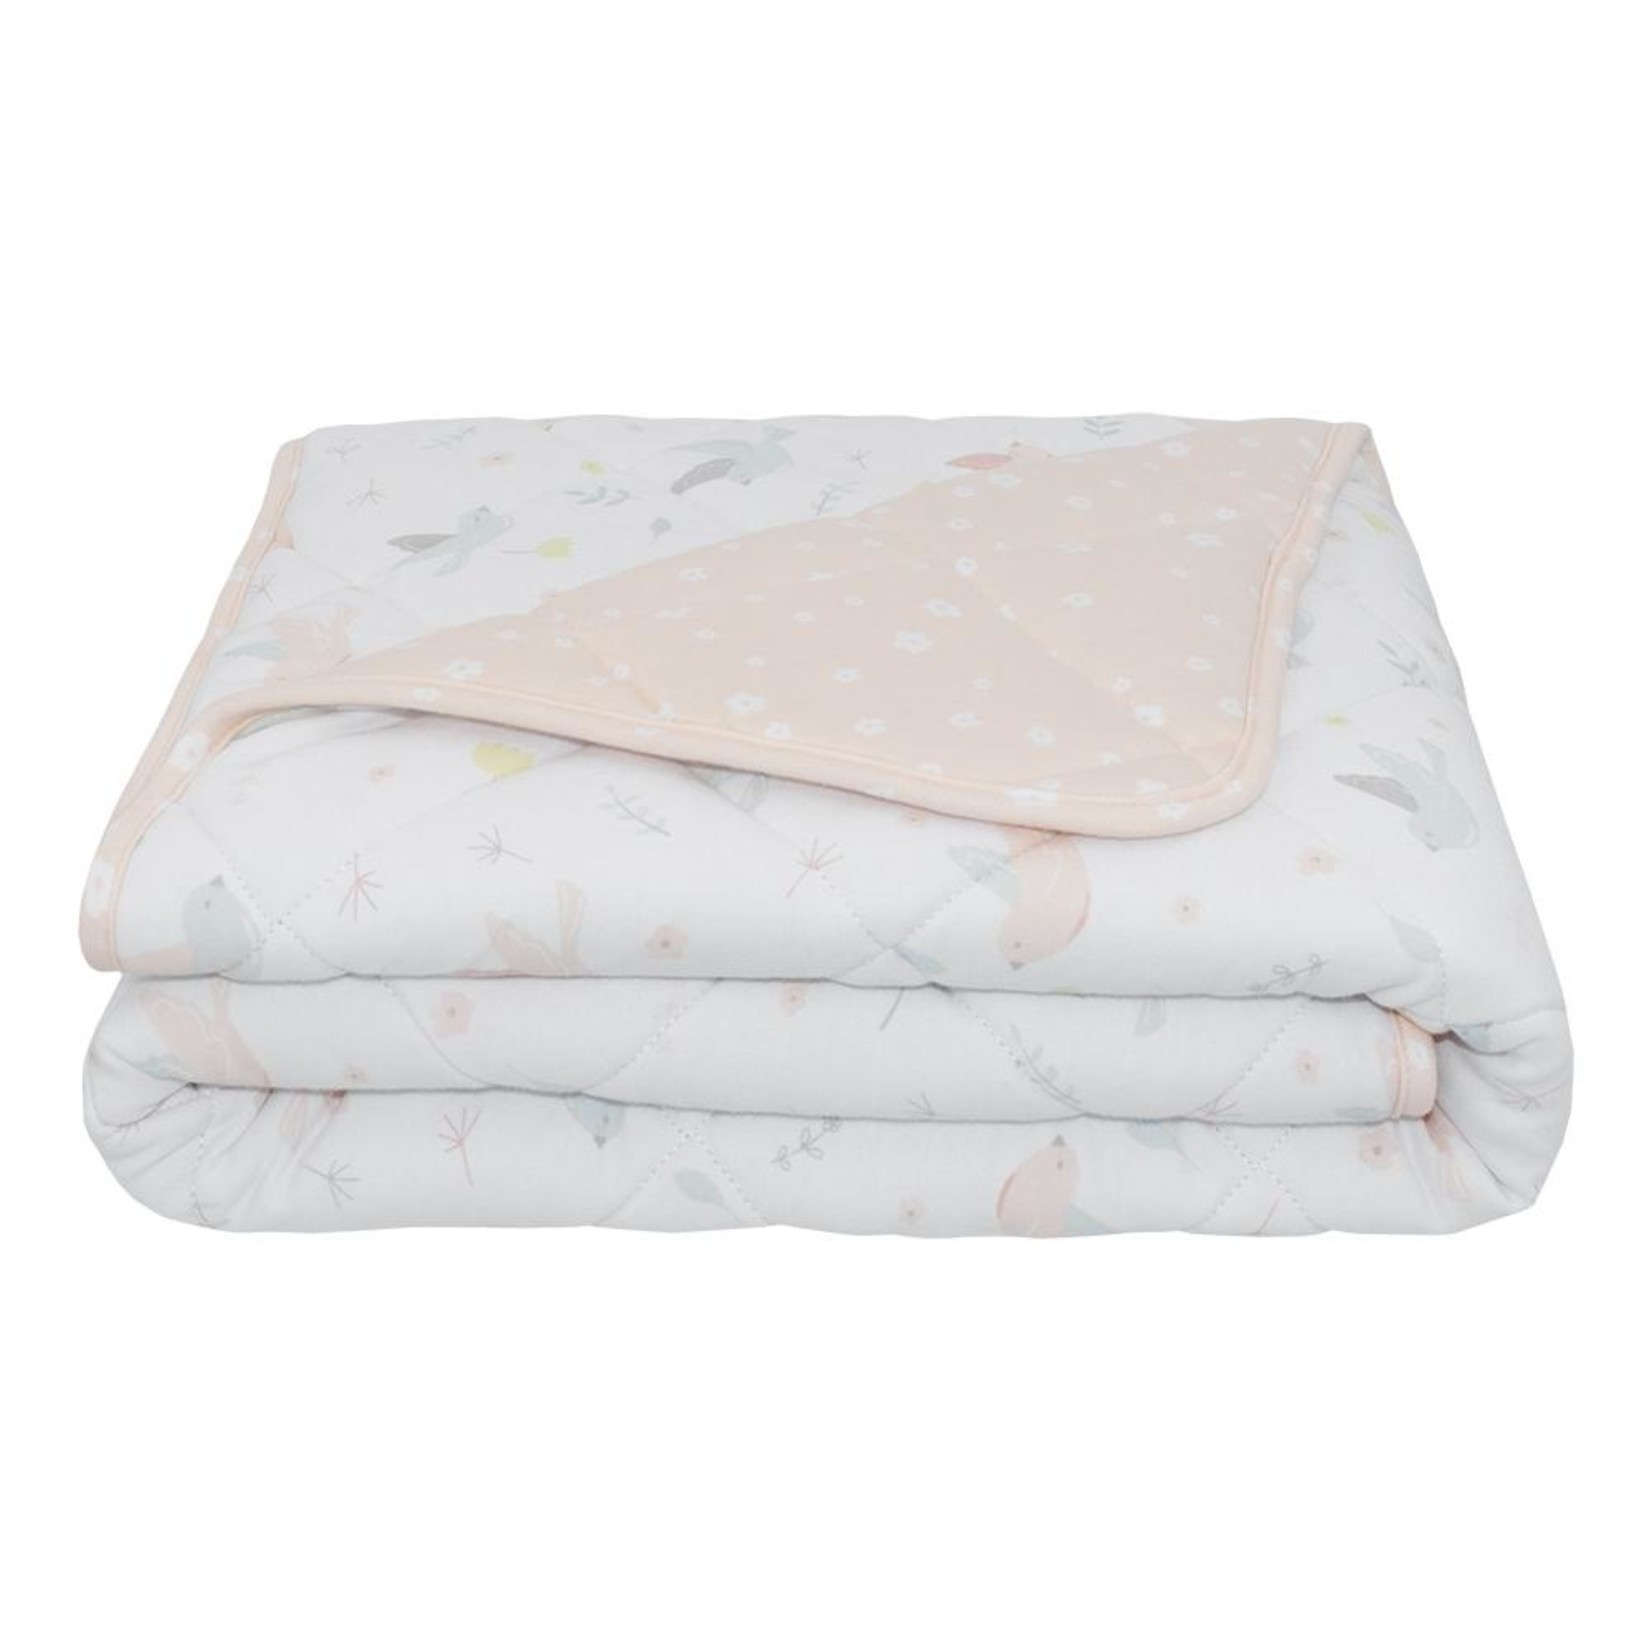 Living Textiles QUILTED COT COMFORTER - AVA/FLORAL